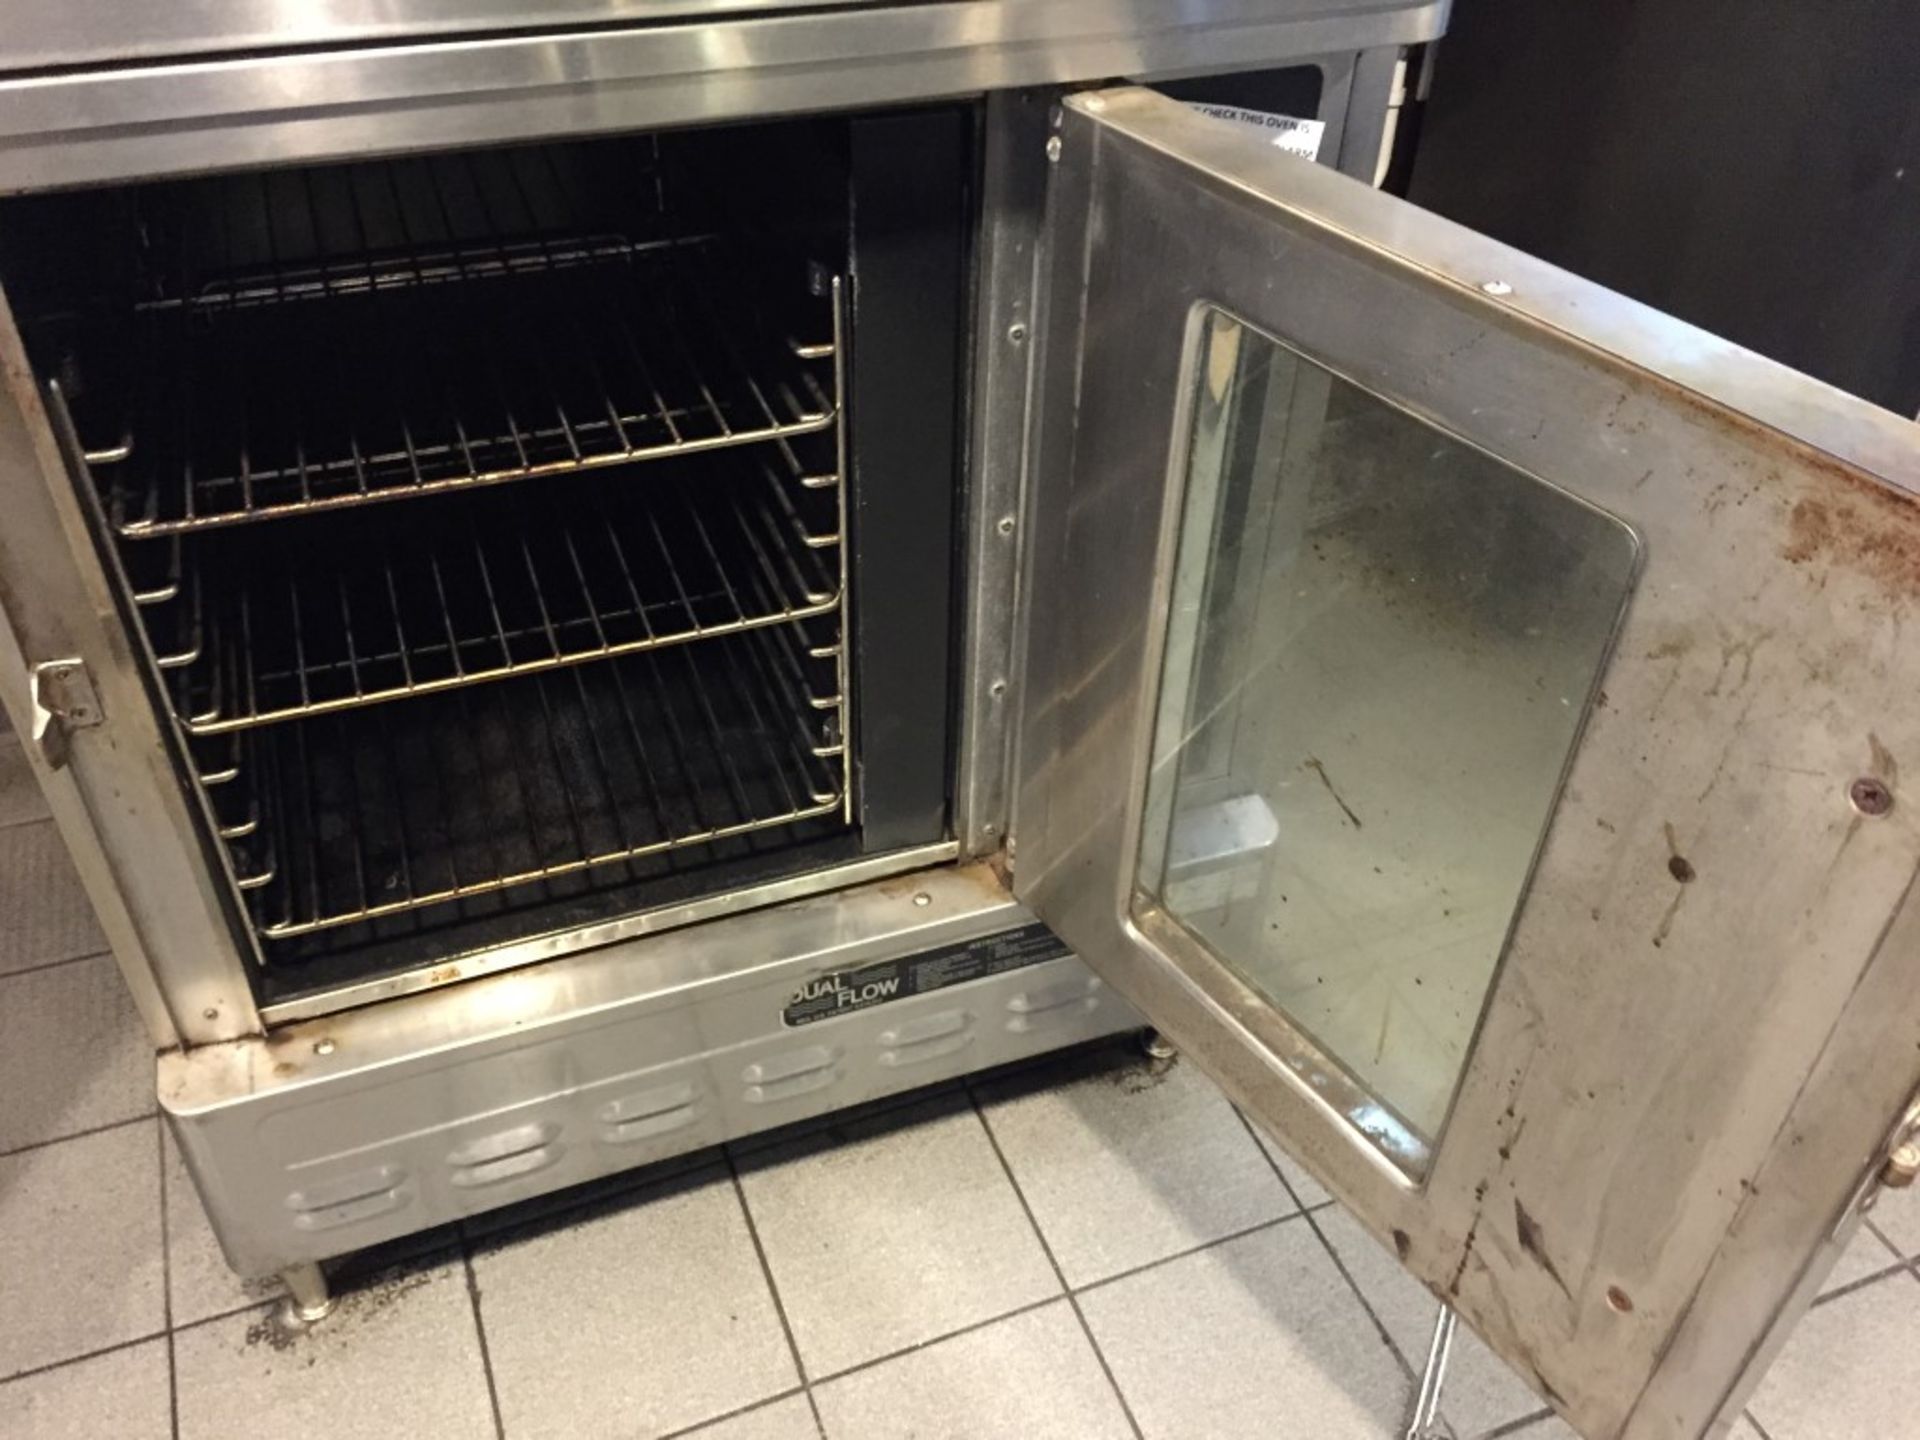 1 x Blodgett Convection Oven - Model DFG50 - Features Duel Flow, Half Size, Single Deck, Solid State - Image 2 of 7